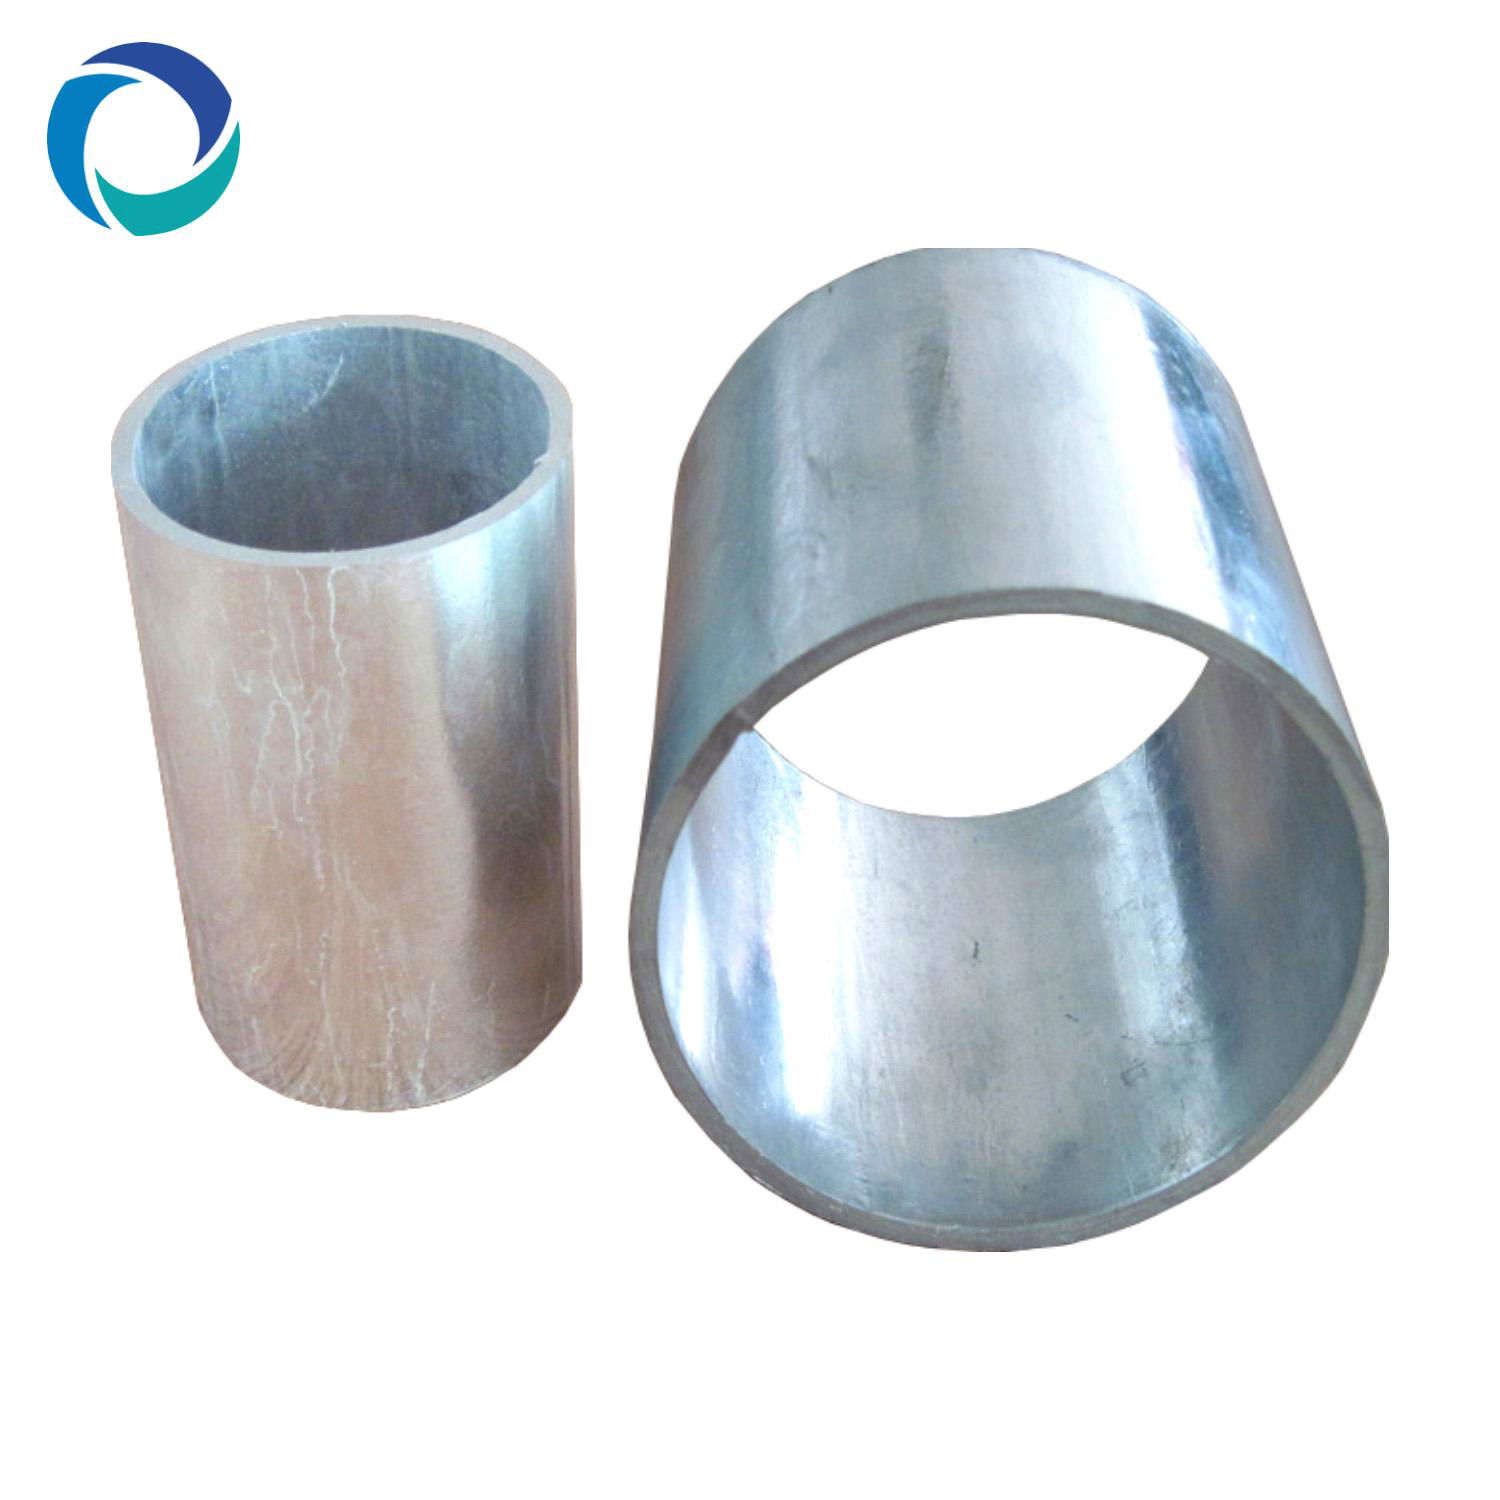 carbon steel blue band 1.75 galvanized pipe 4